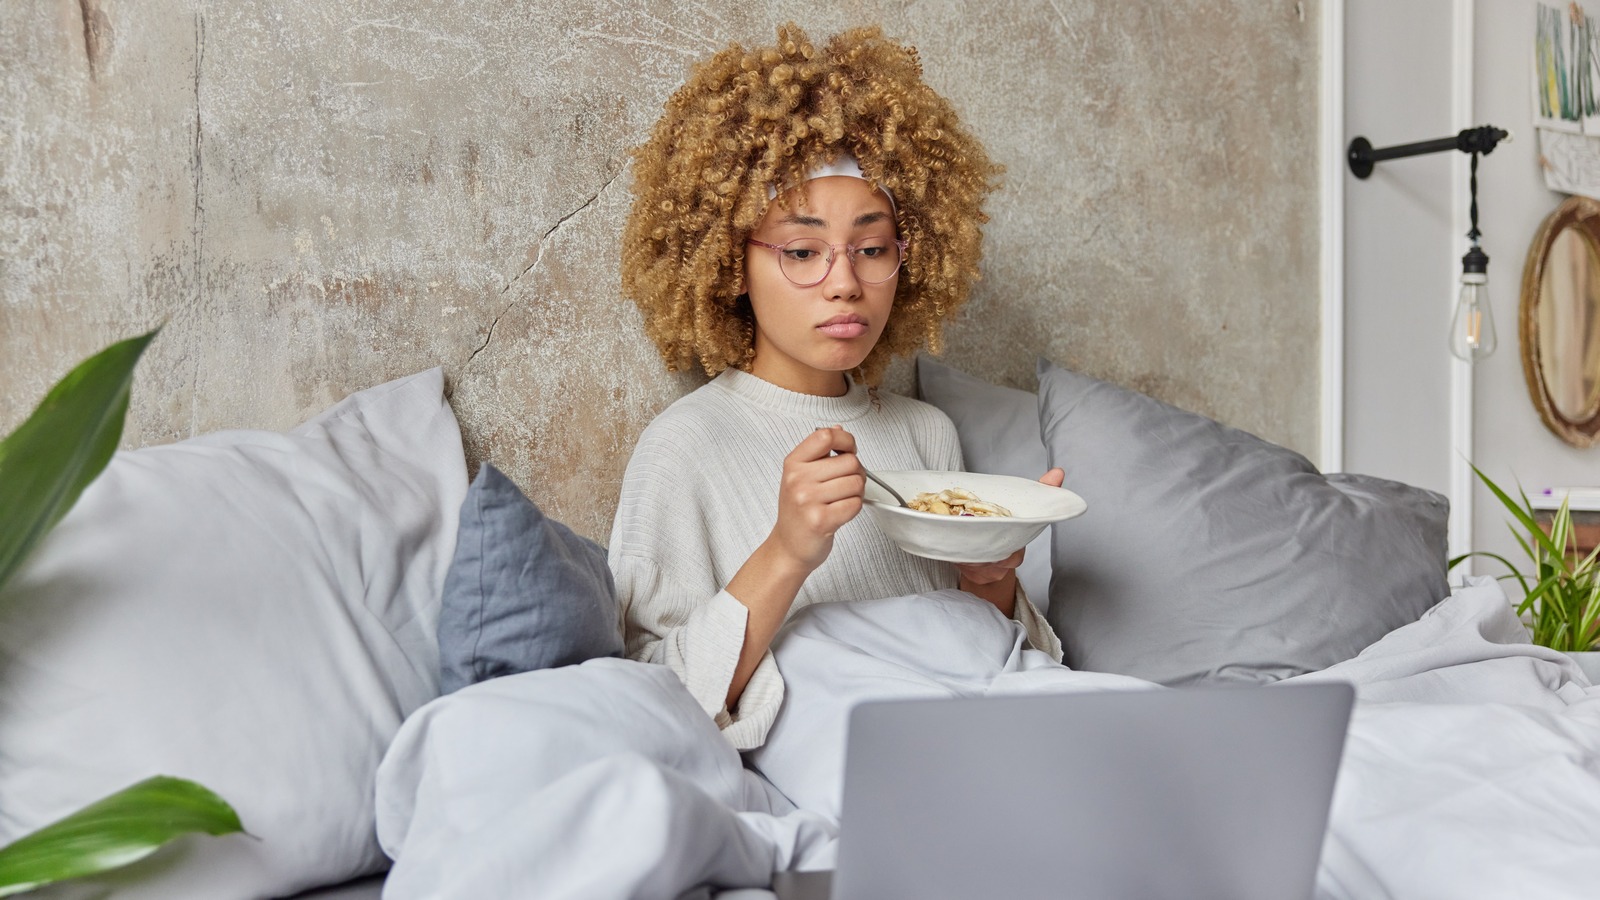 Eat This Unexpected Snack Before Bed To Fall Asleep In Record Time - Health Digest